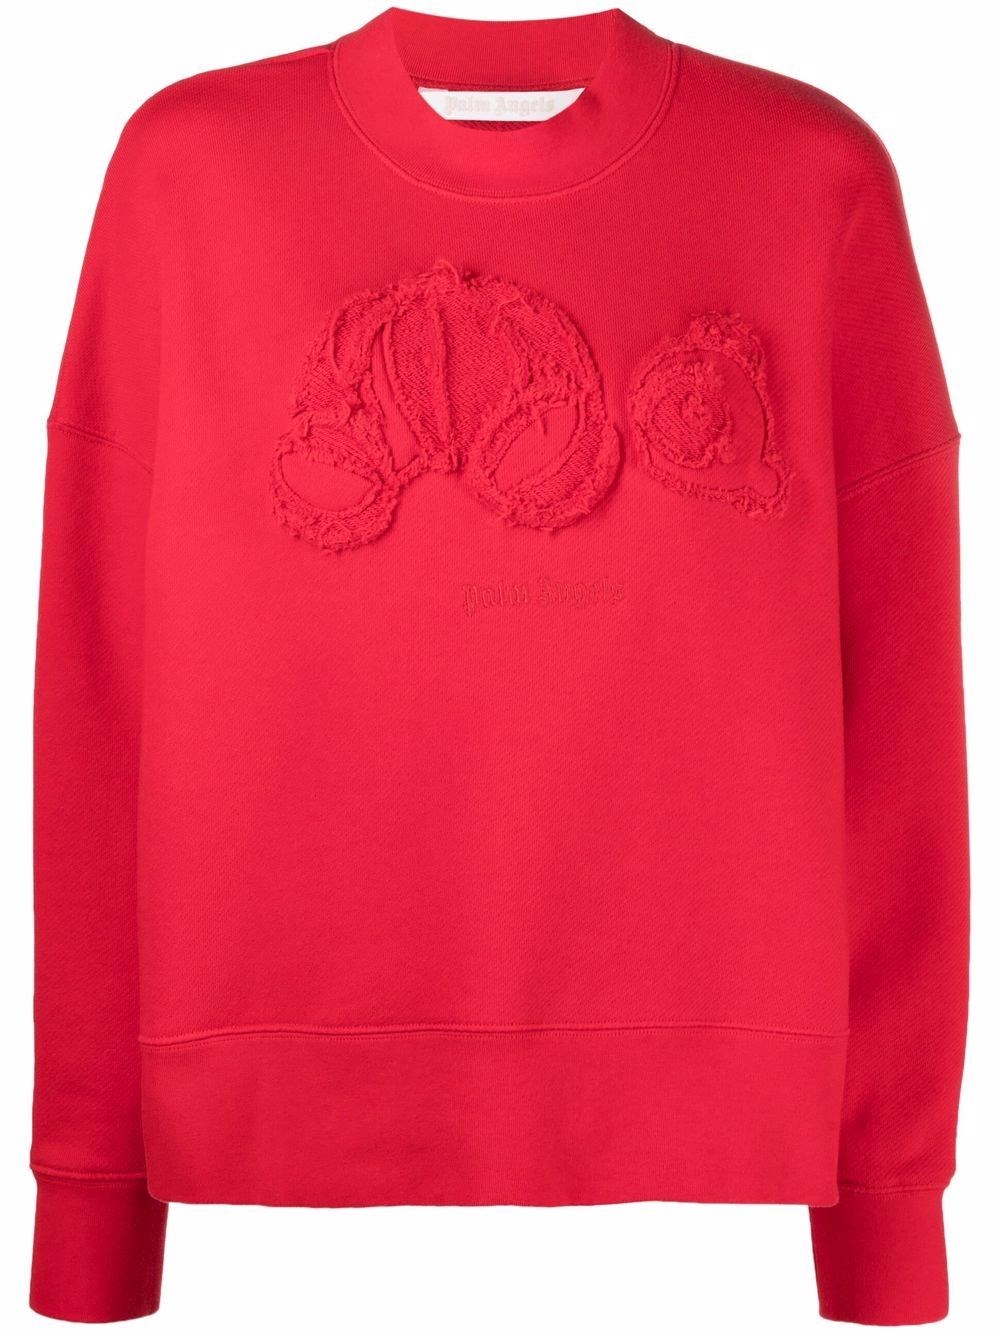 palm angels TEDDY BEAR SWEATER available on montiboutique.com - 41065